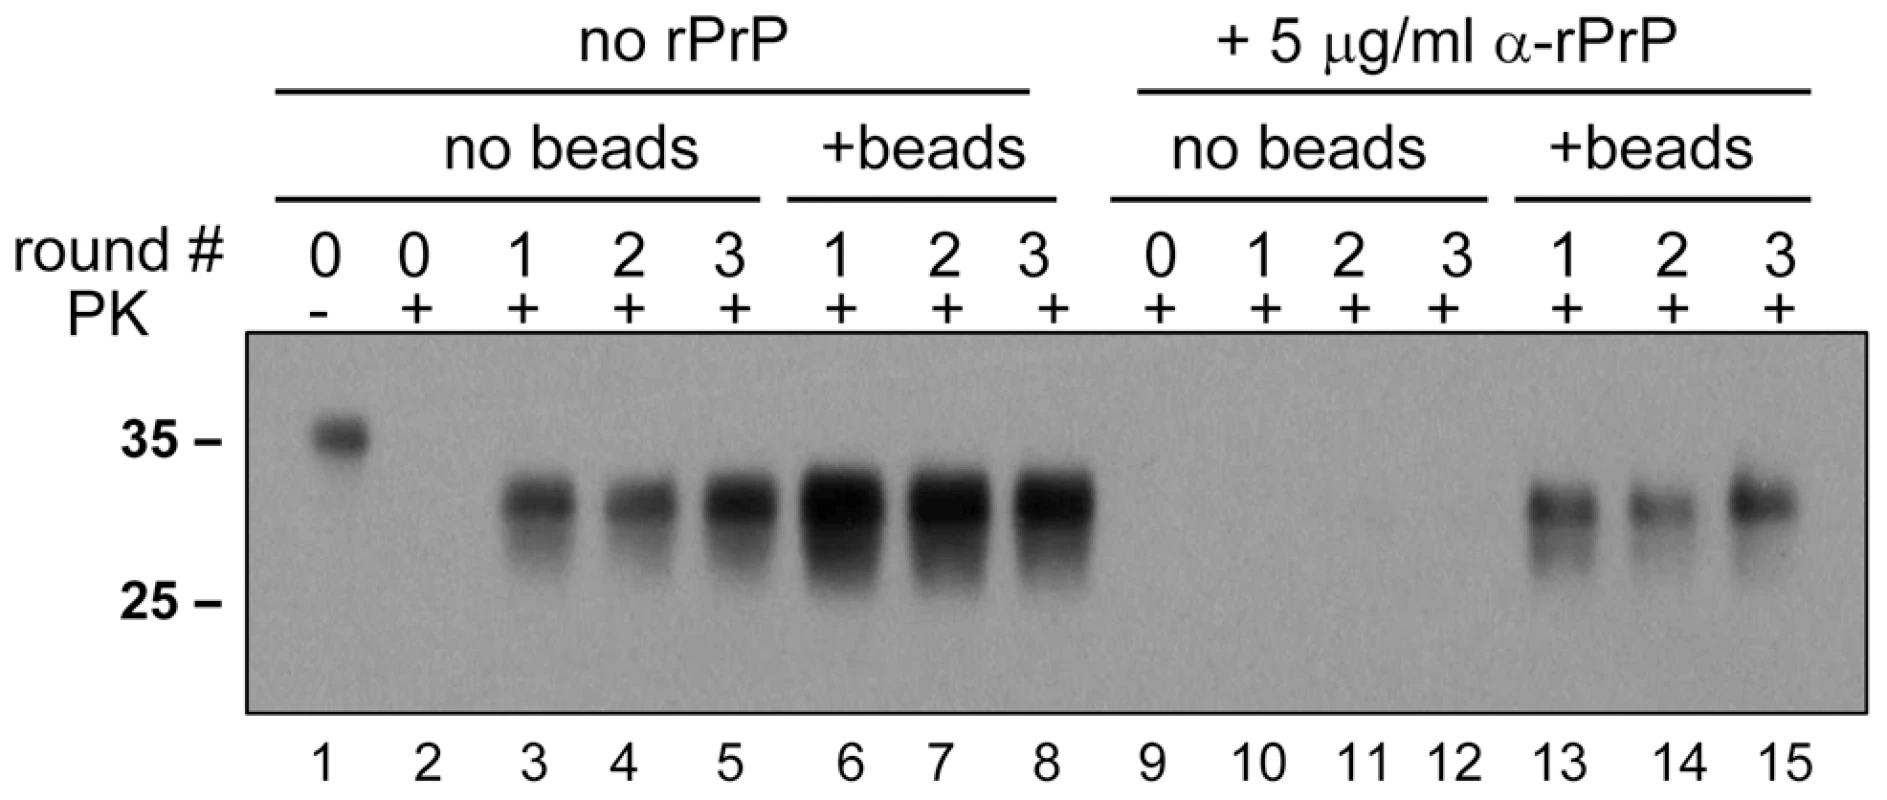 Beads counteract the negative effect of rPrP on PrP<sup>Sc</sup> amplification.